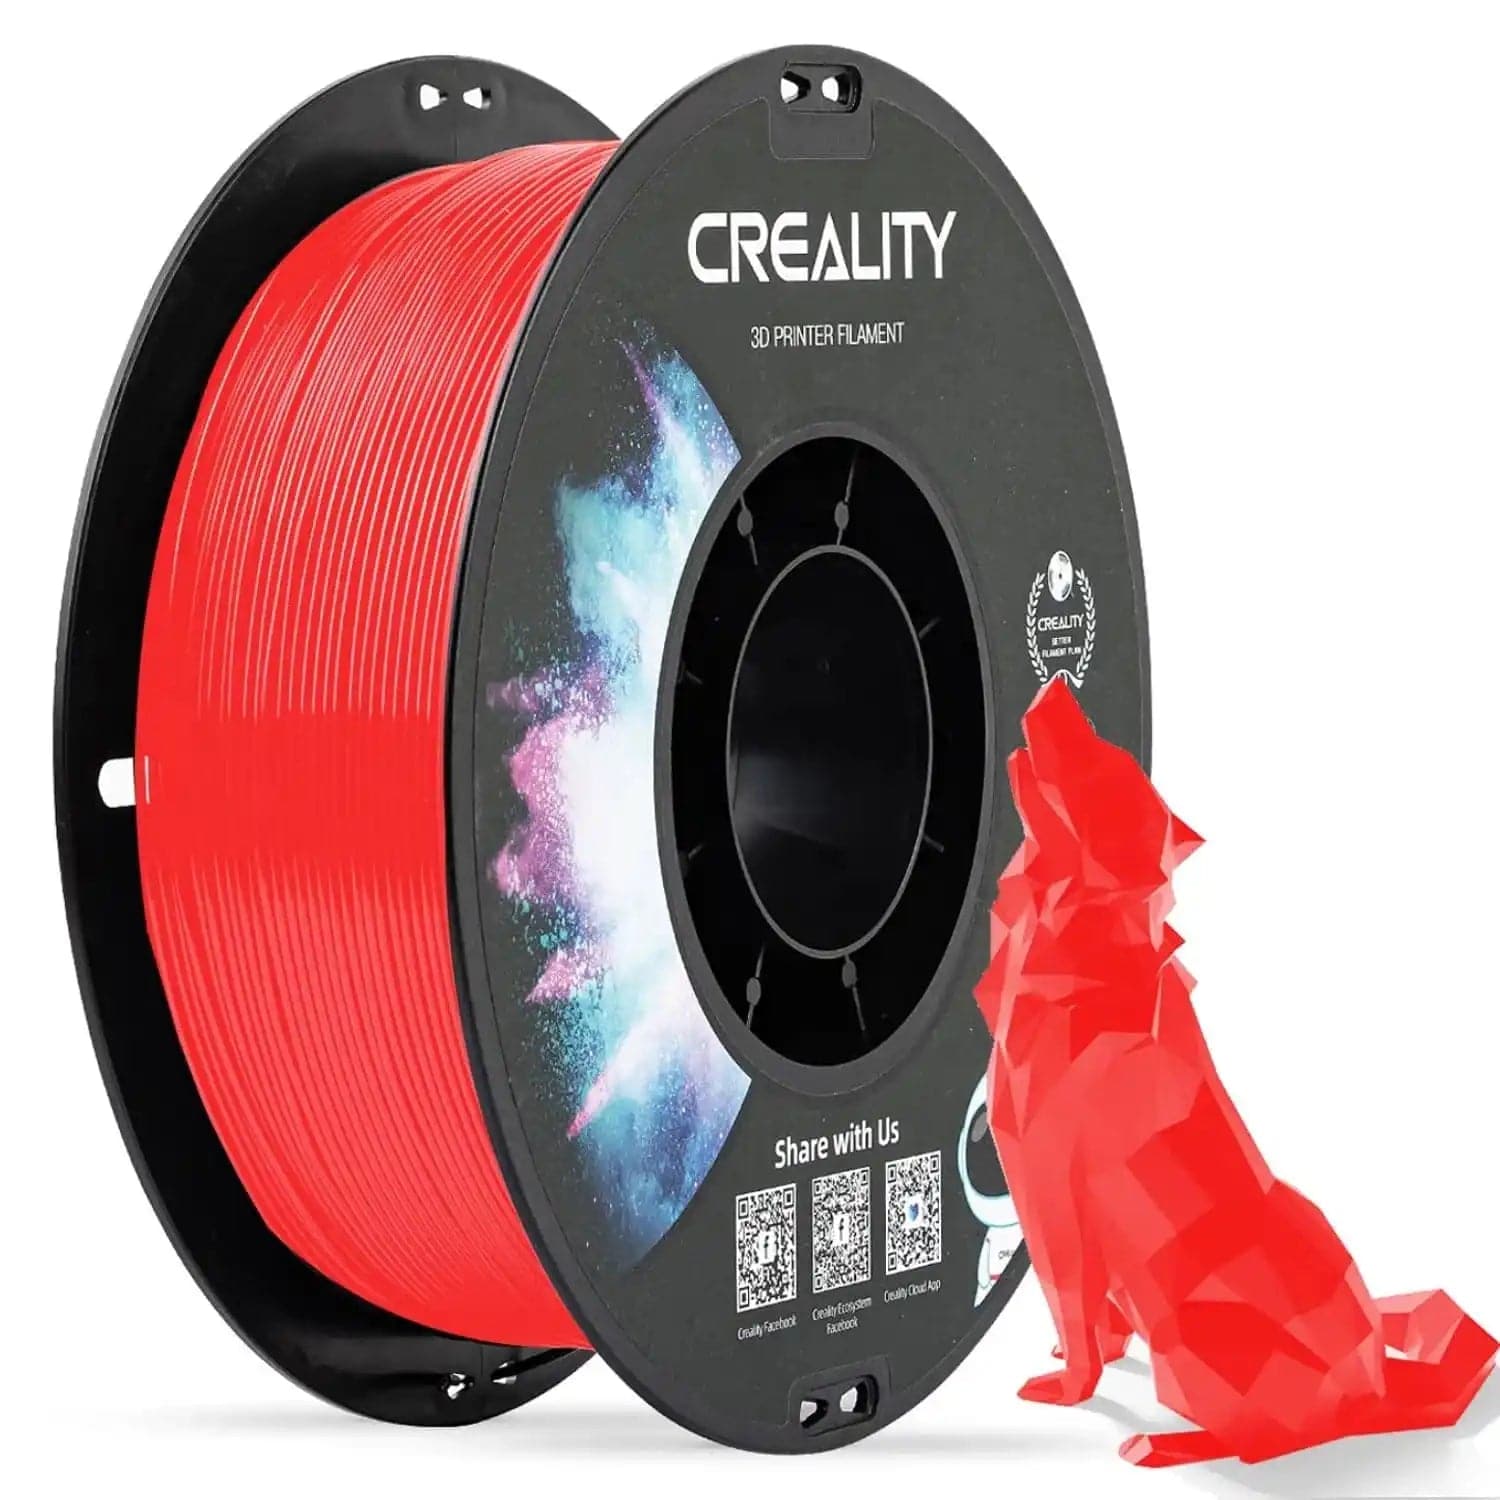 Creality 3D Printer Filament 1.75mm, Ender PLA Filament No-Tangling Smooth  Printing Without Clogging No Warping, Fit Most FDM 3D Printers, 1kg Spool